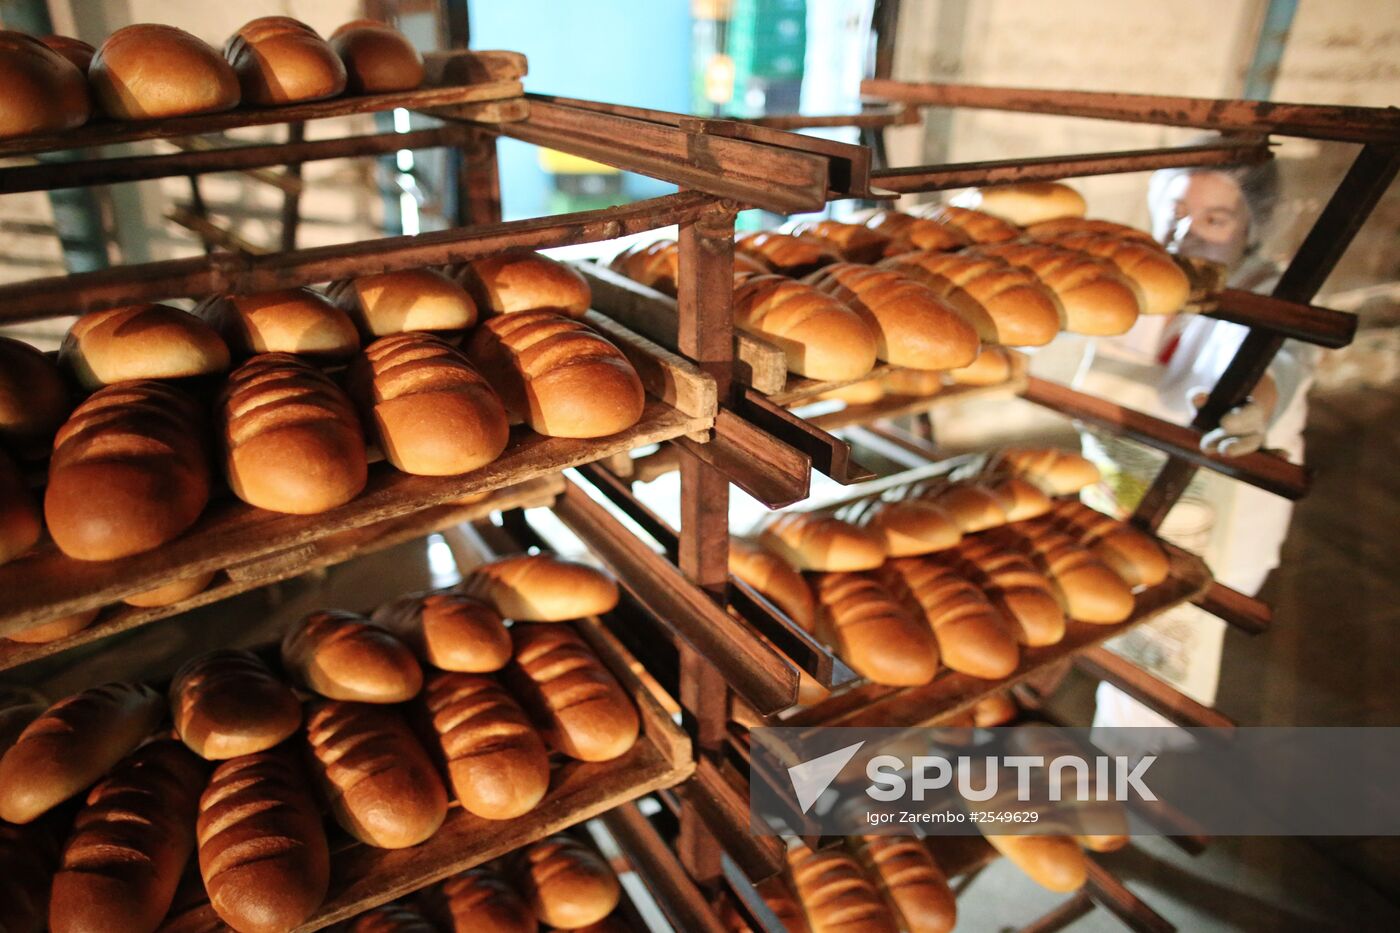 Work of Polessky Bread Baking Plant